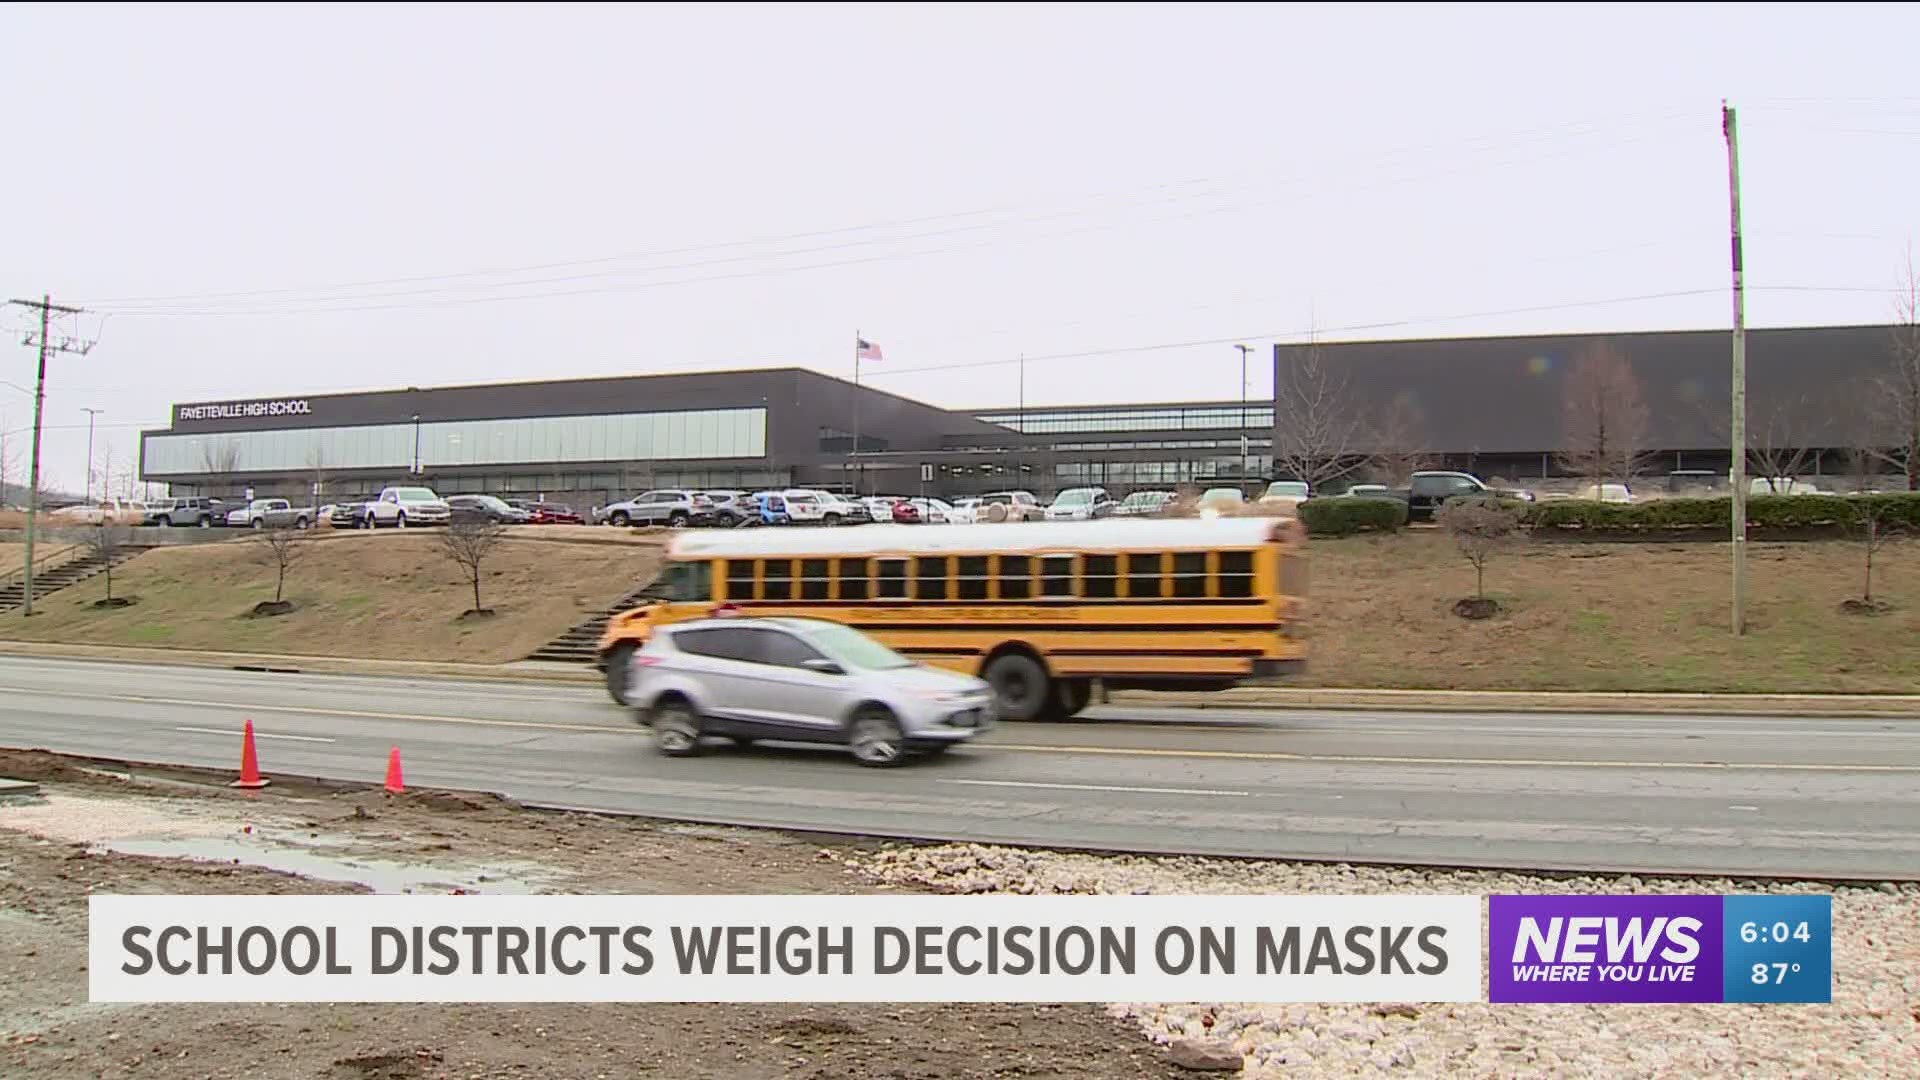 School districts weigh the decision on masks